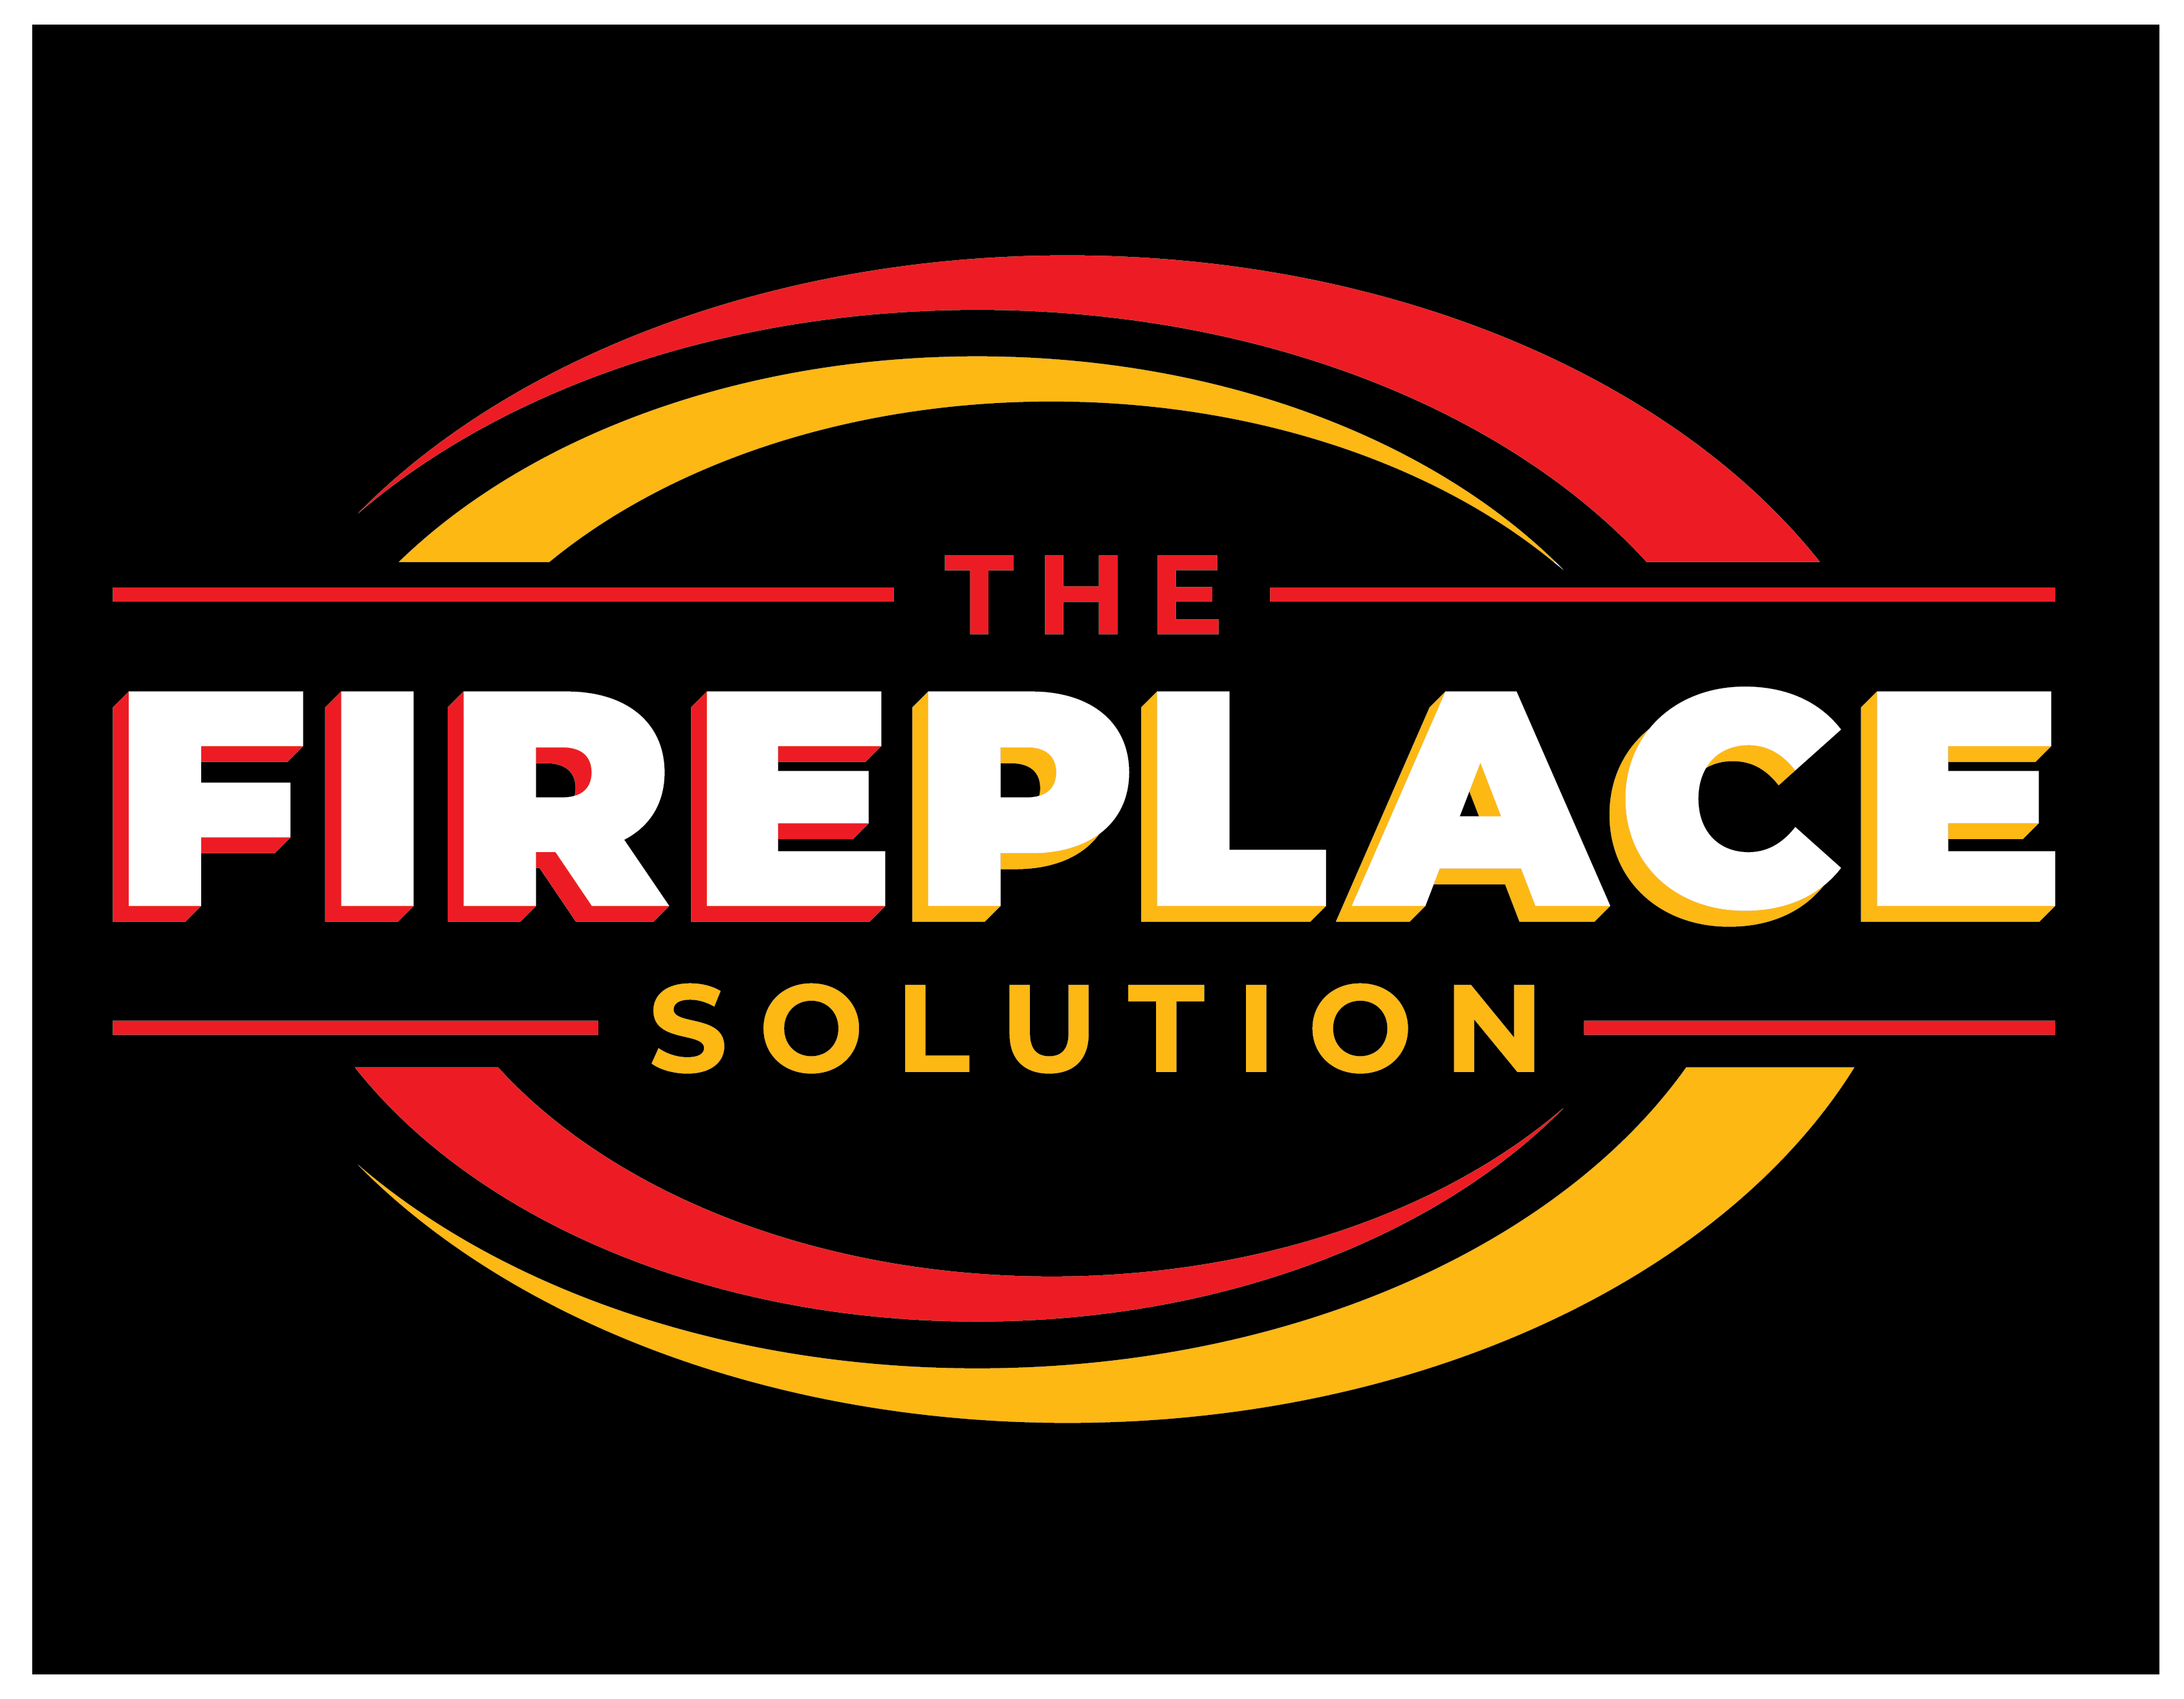 The Fireplace Solution logo